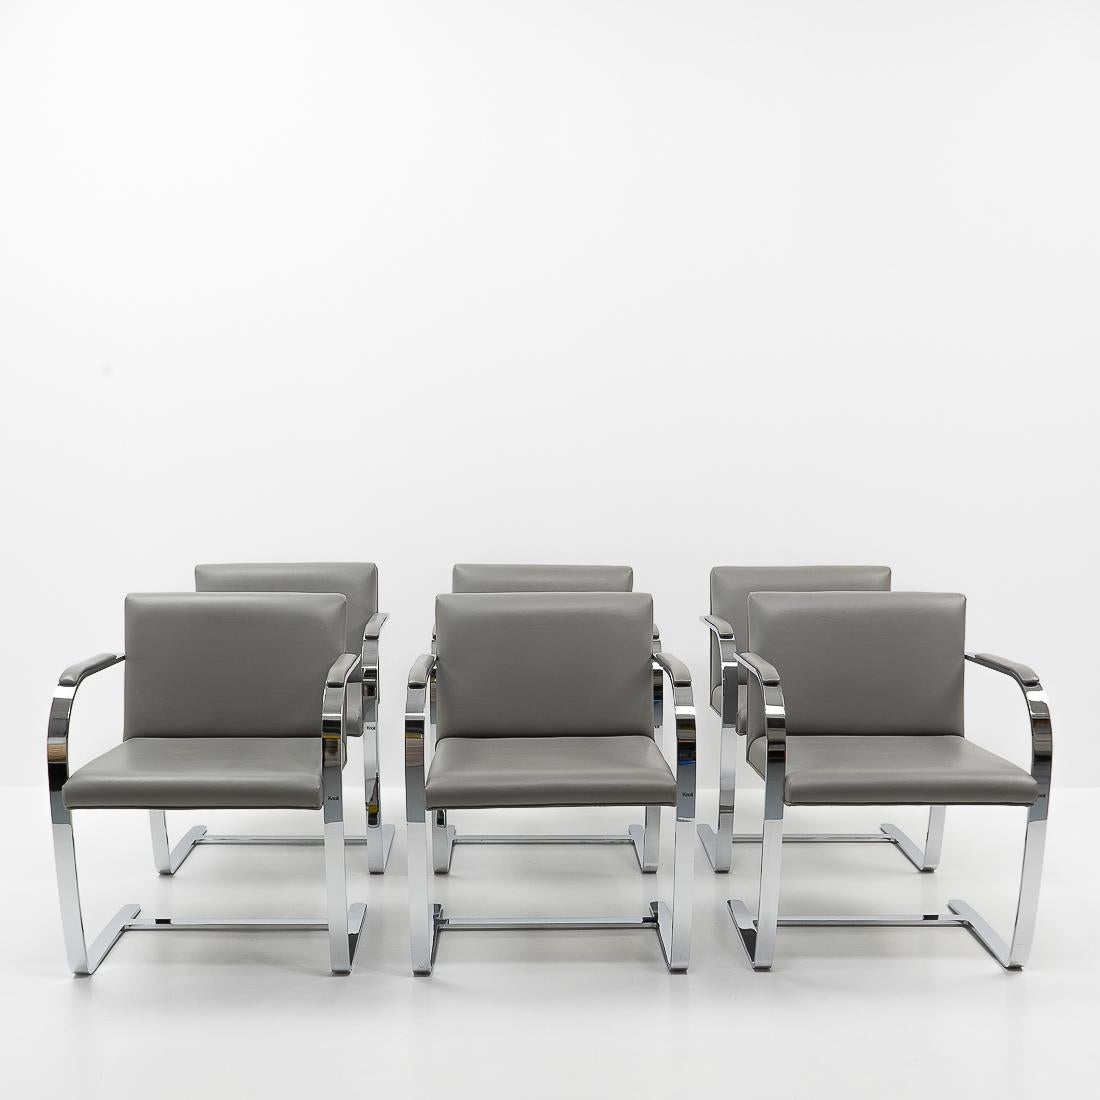 Italian Design Classic: Mies Van Der Rohe, Set of Six Brno Chairs for Knoll, 1980s